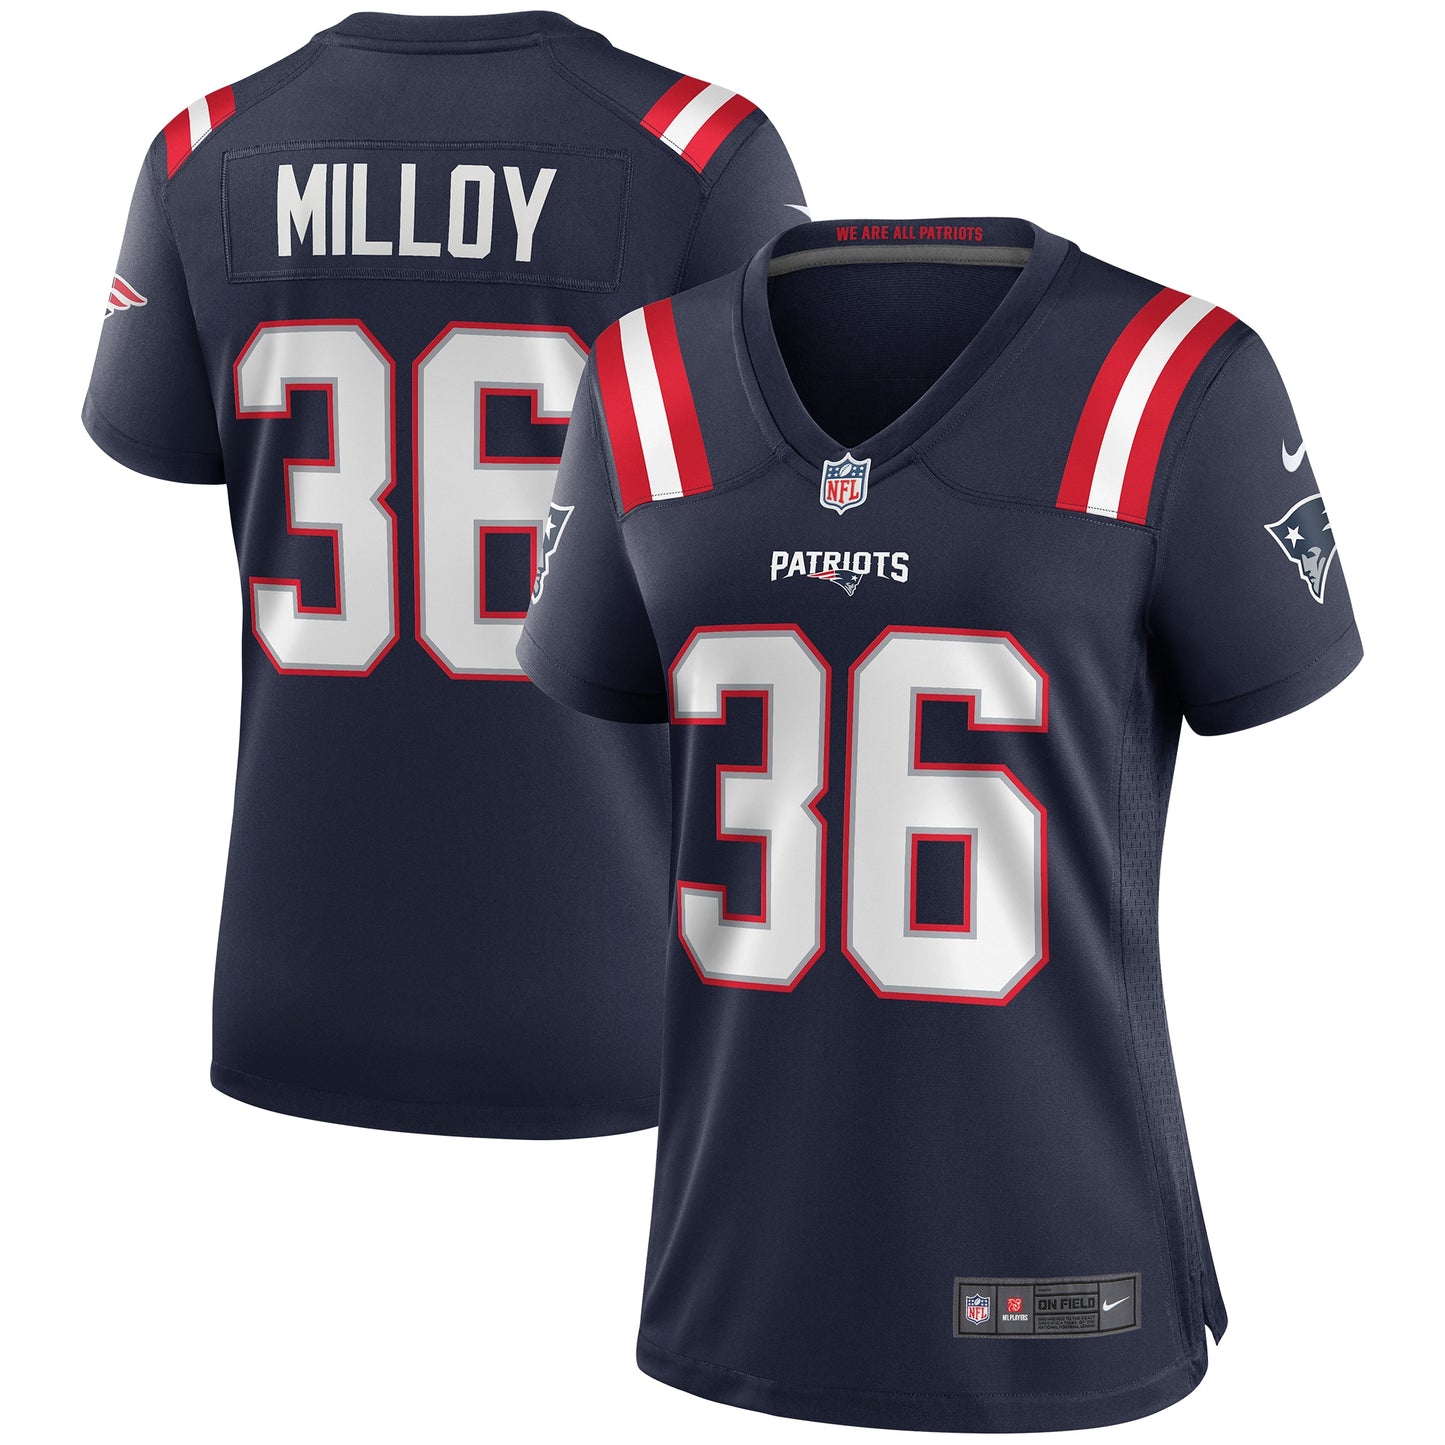 Lawyer Milloy New England Patriots Nike Women's Game Retired Player Jersey - Navy